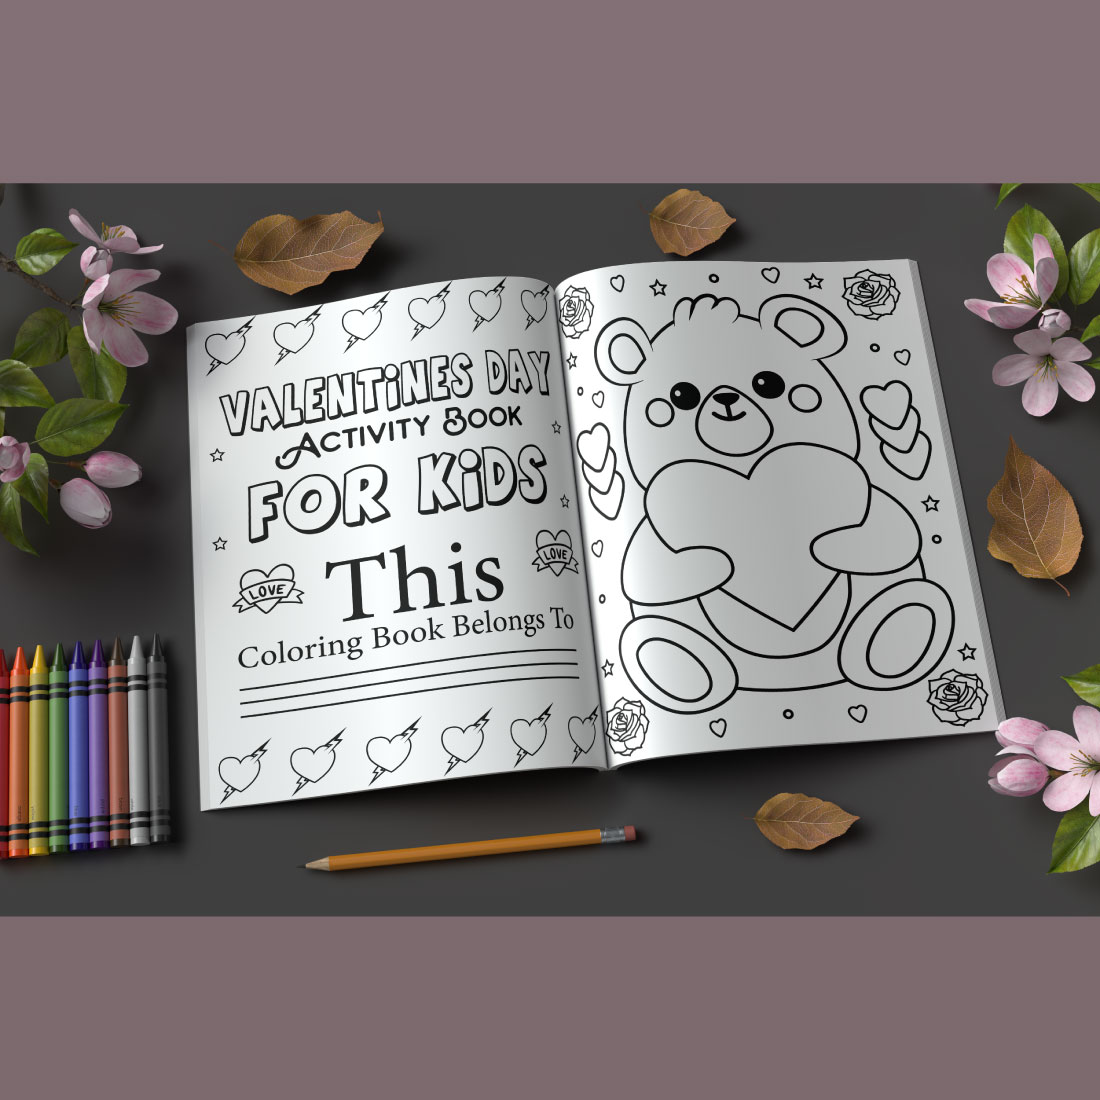 Valentines Day Activity Coloring Page Bundle image preview.